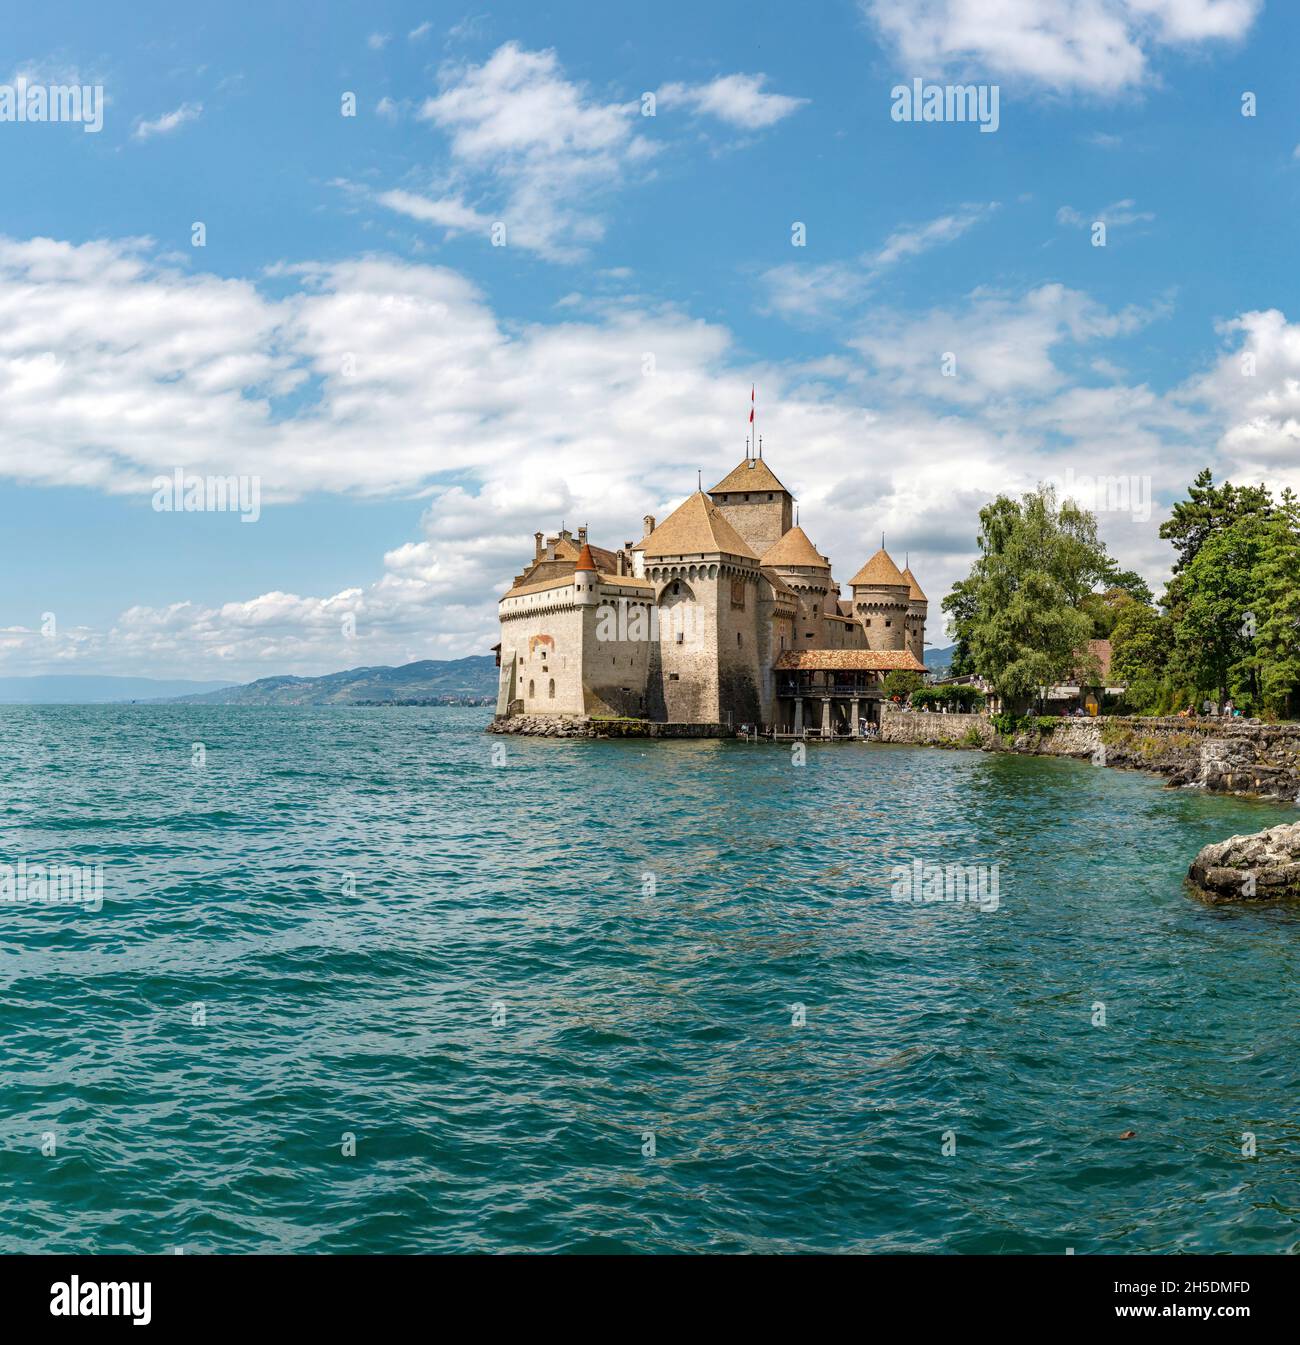 Chateau Chillon at the Lac Léman *** Local Caption ***  Veytaux, Switzerland, castle, water, trees, summer, mountains, lake, Stock Photo